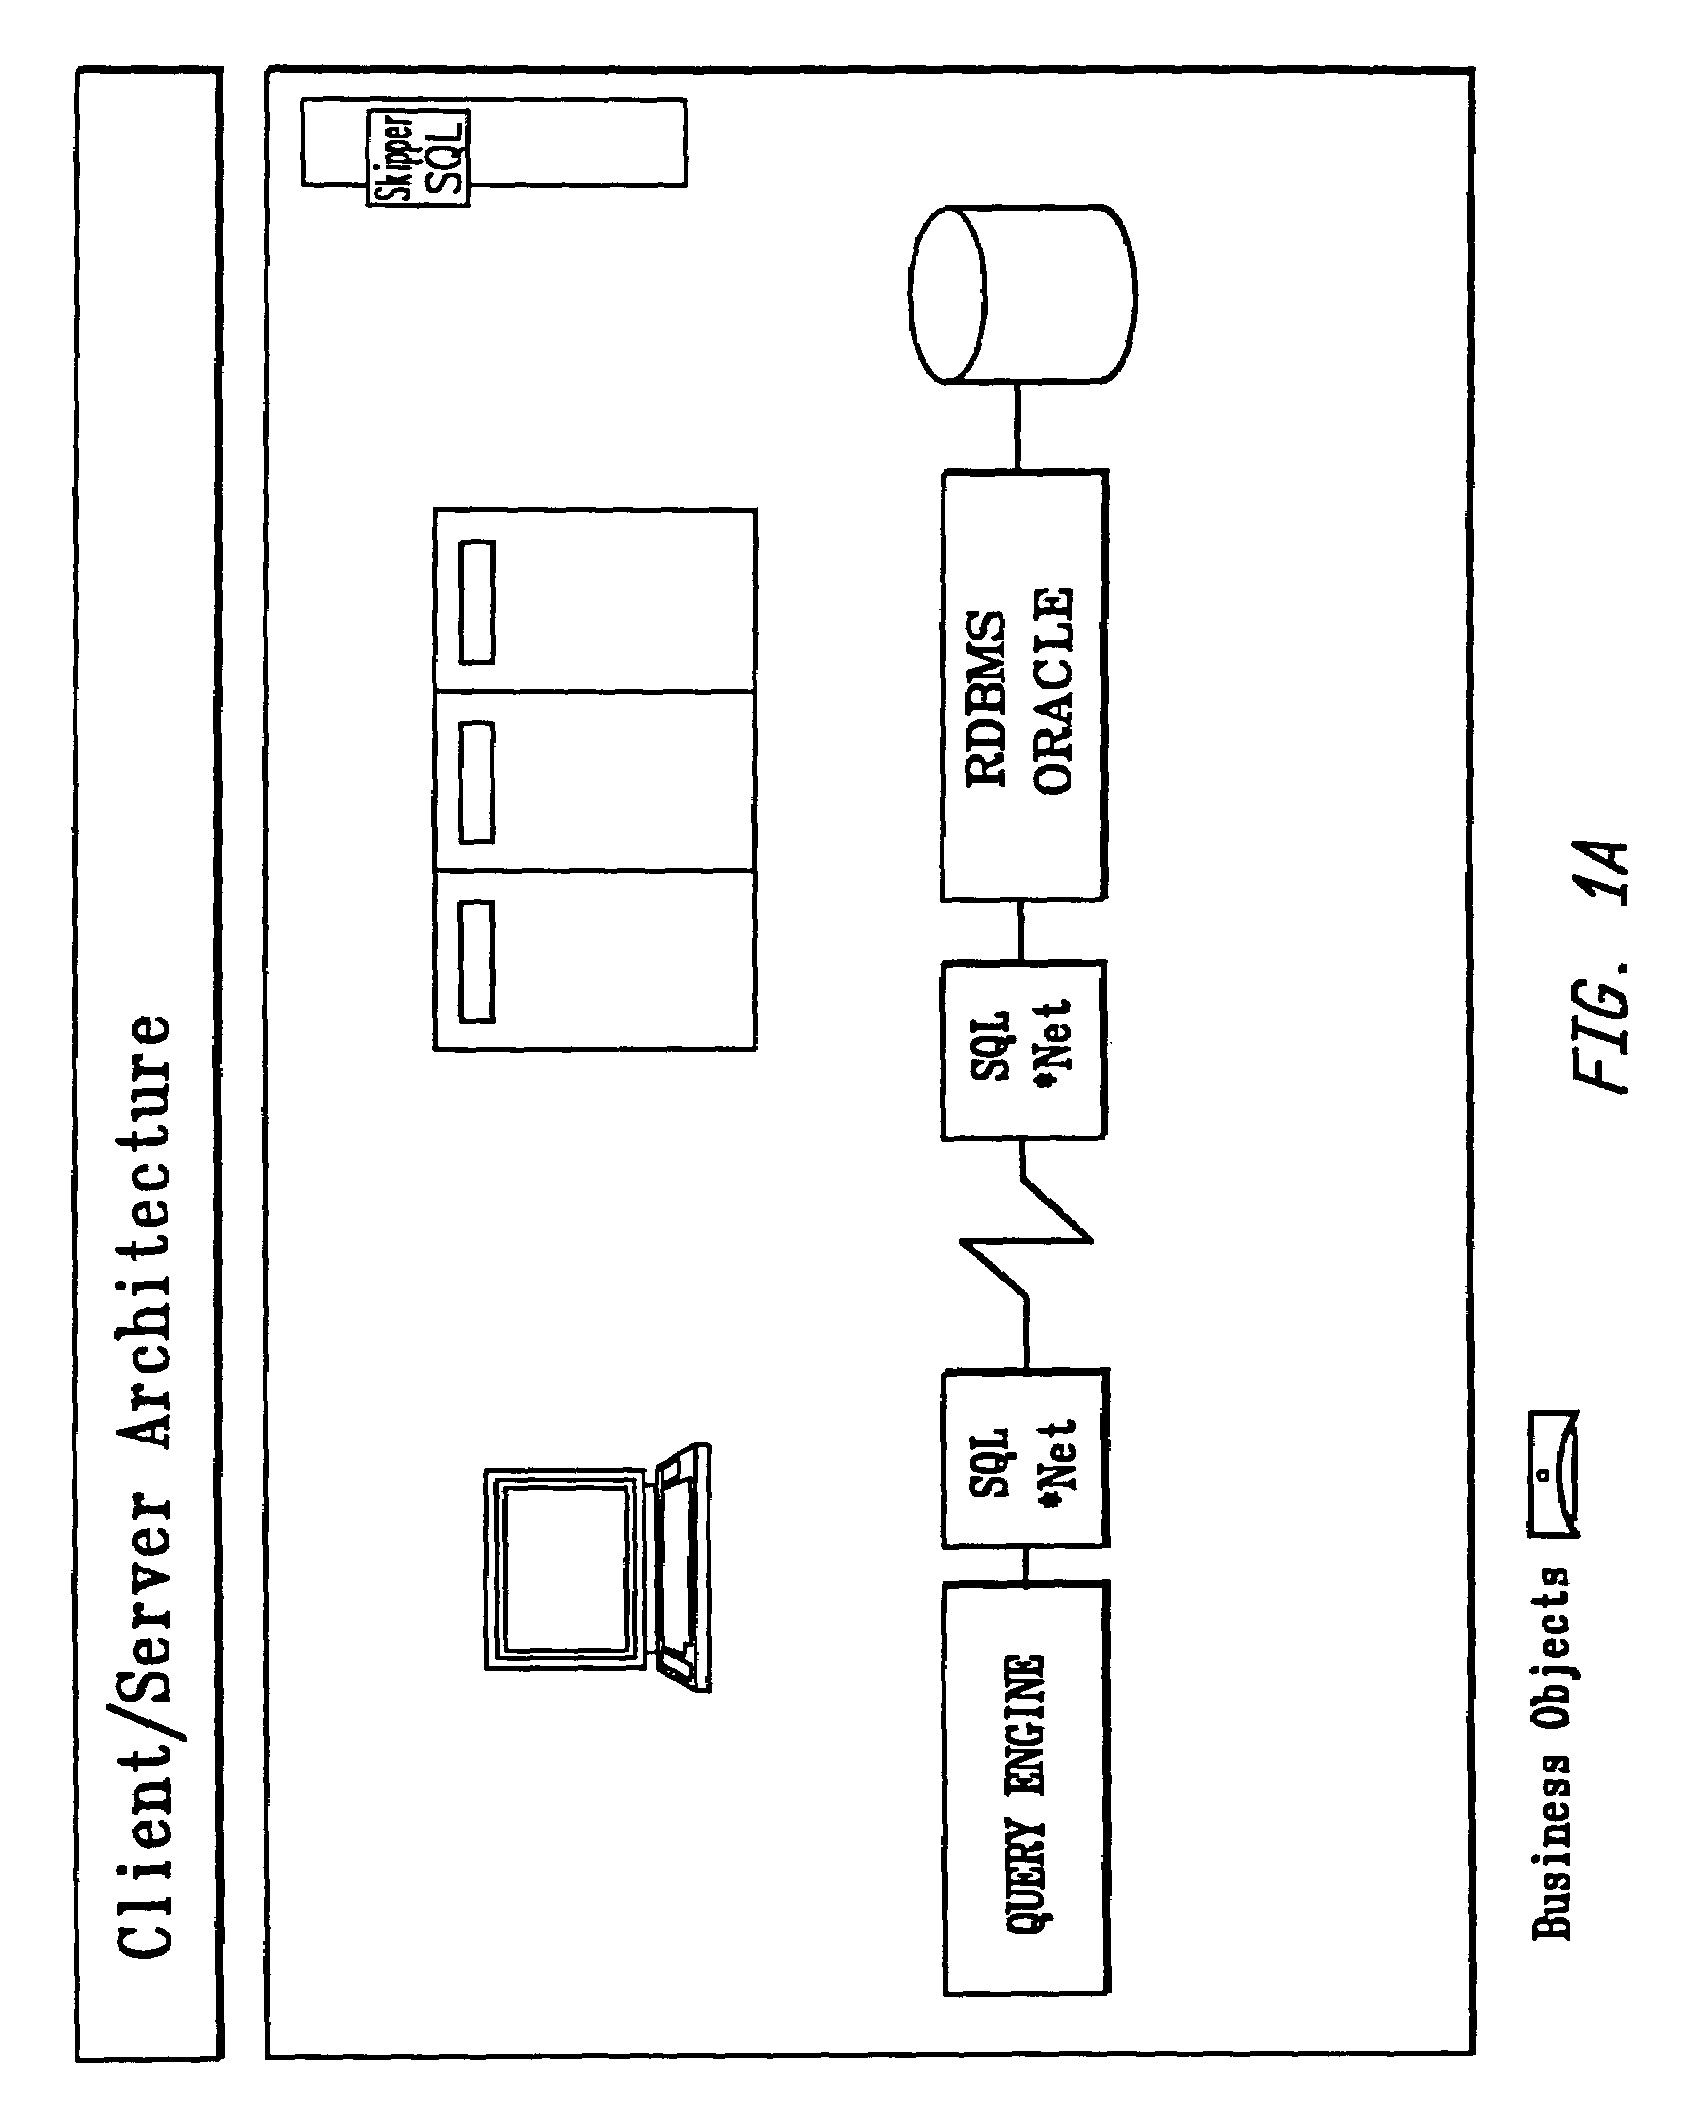 Relational database access system using semantically dynamic objects